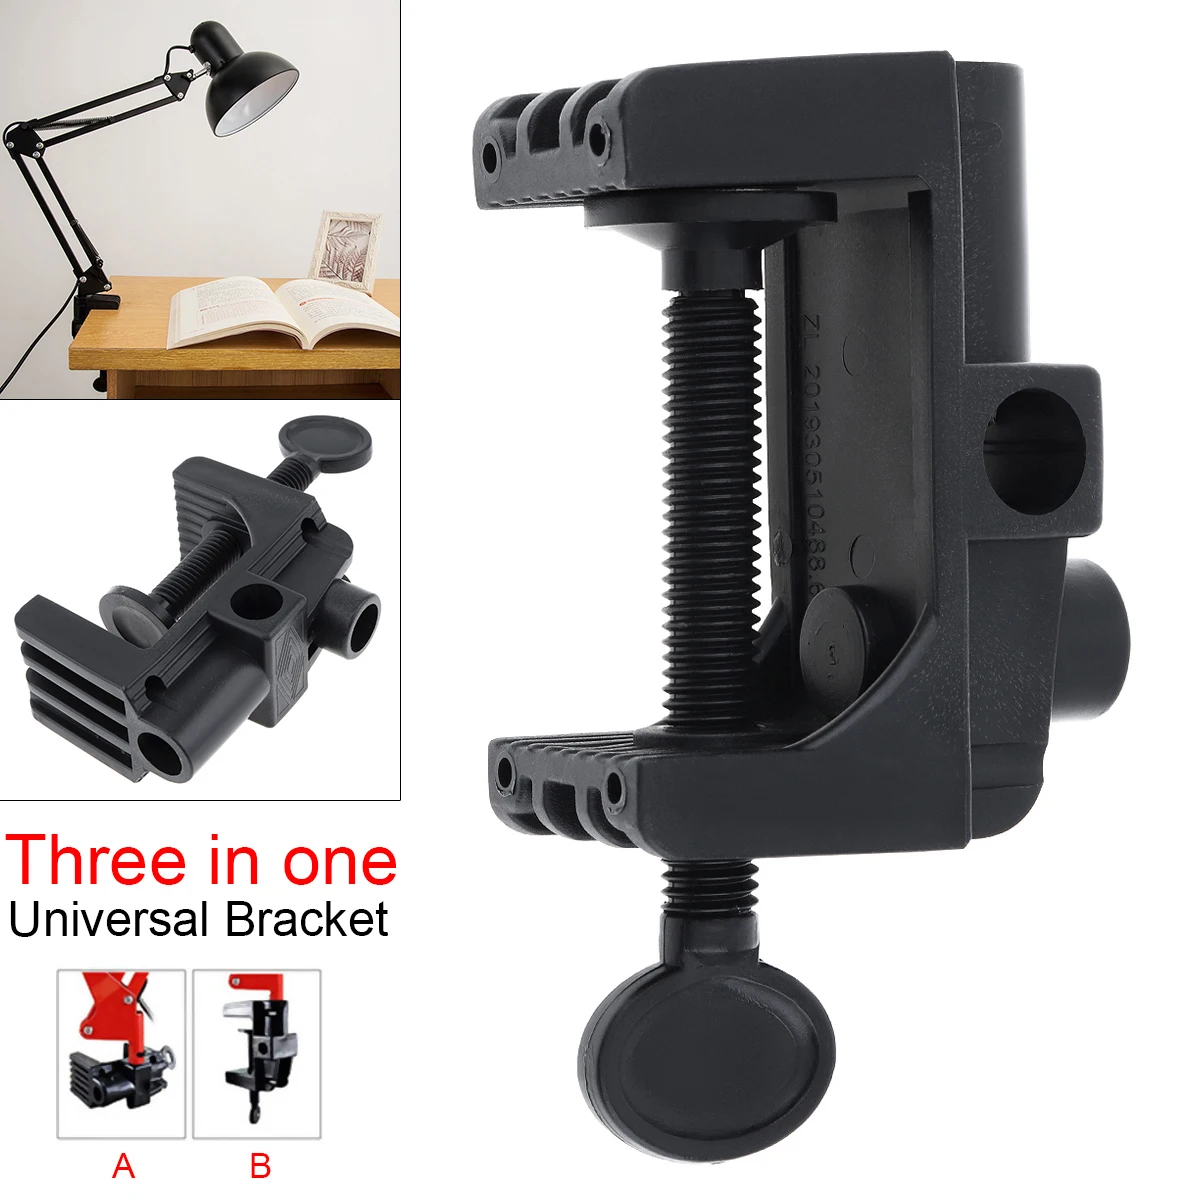 Desk Lamp Mount Holder C-Shape Made of Plastic DIY Fixed Clip for Table Light / Microphone / Camera 1 3 3mp 25mm cctv lens view 70m 11 degrees f1 4 ir fixed iris cs mount for security ccd camera